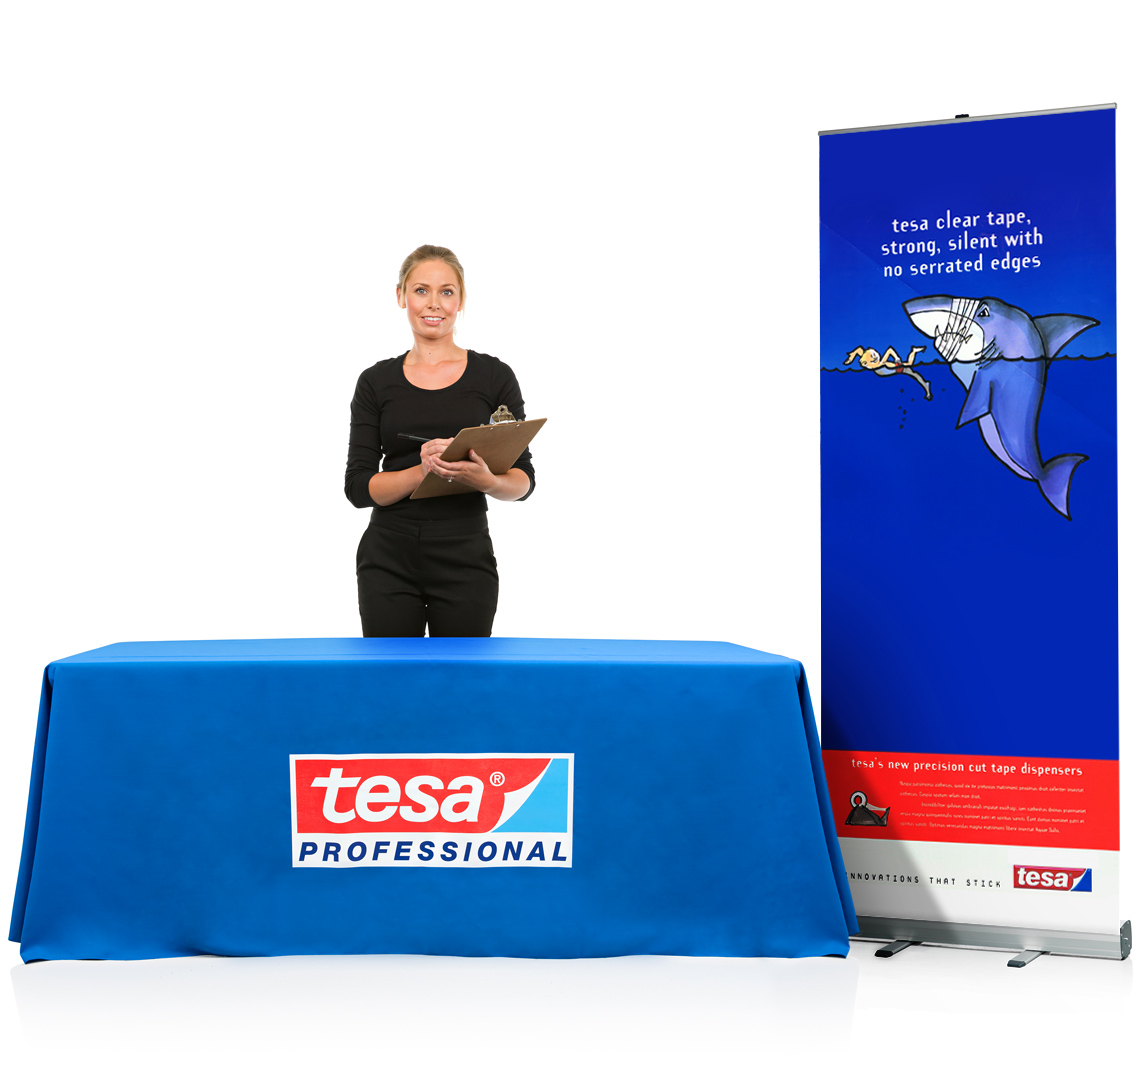 Printed Tablecloth with Grasshopper Pull Up Banner